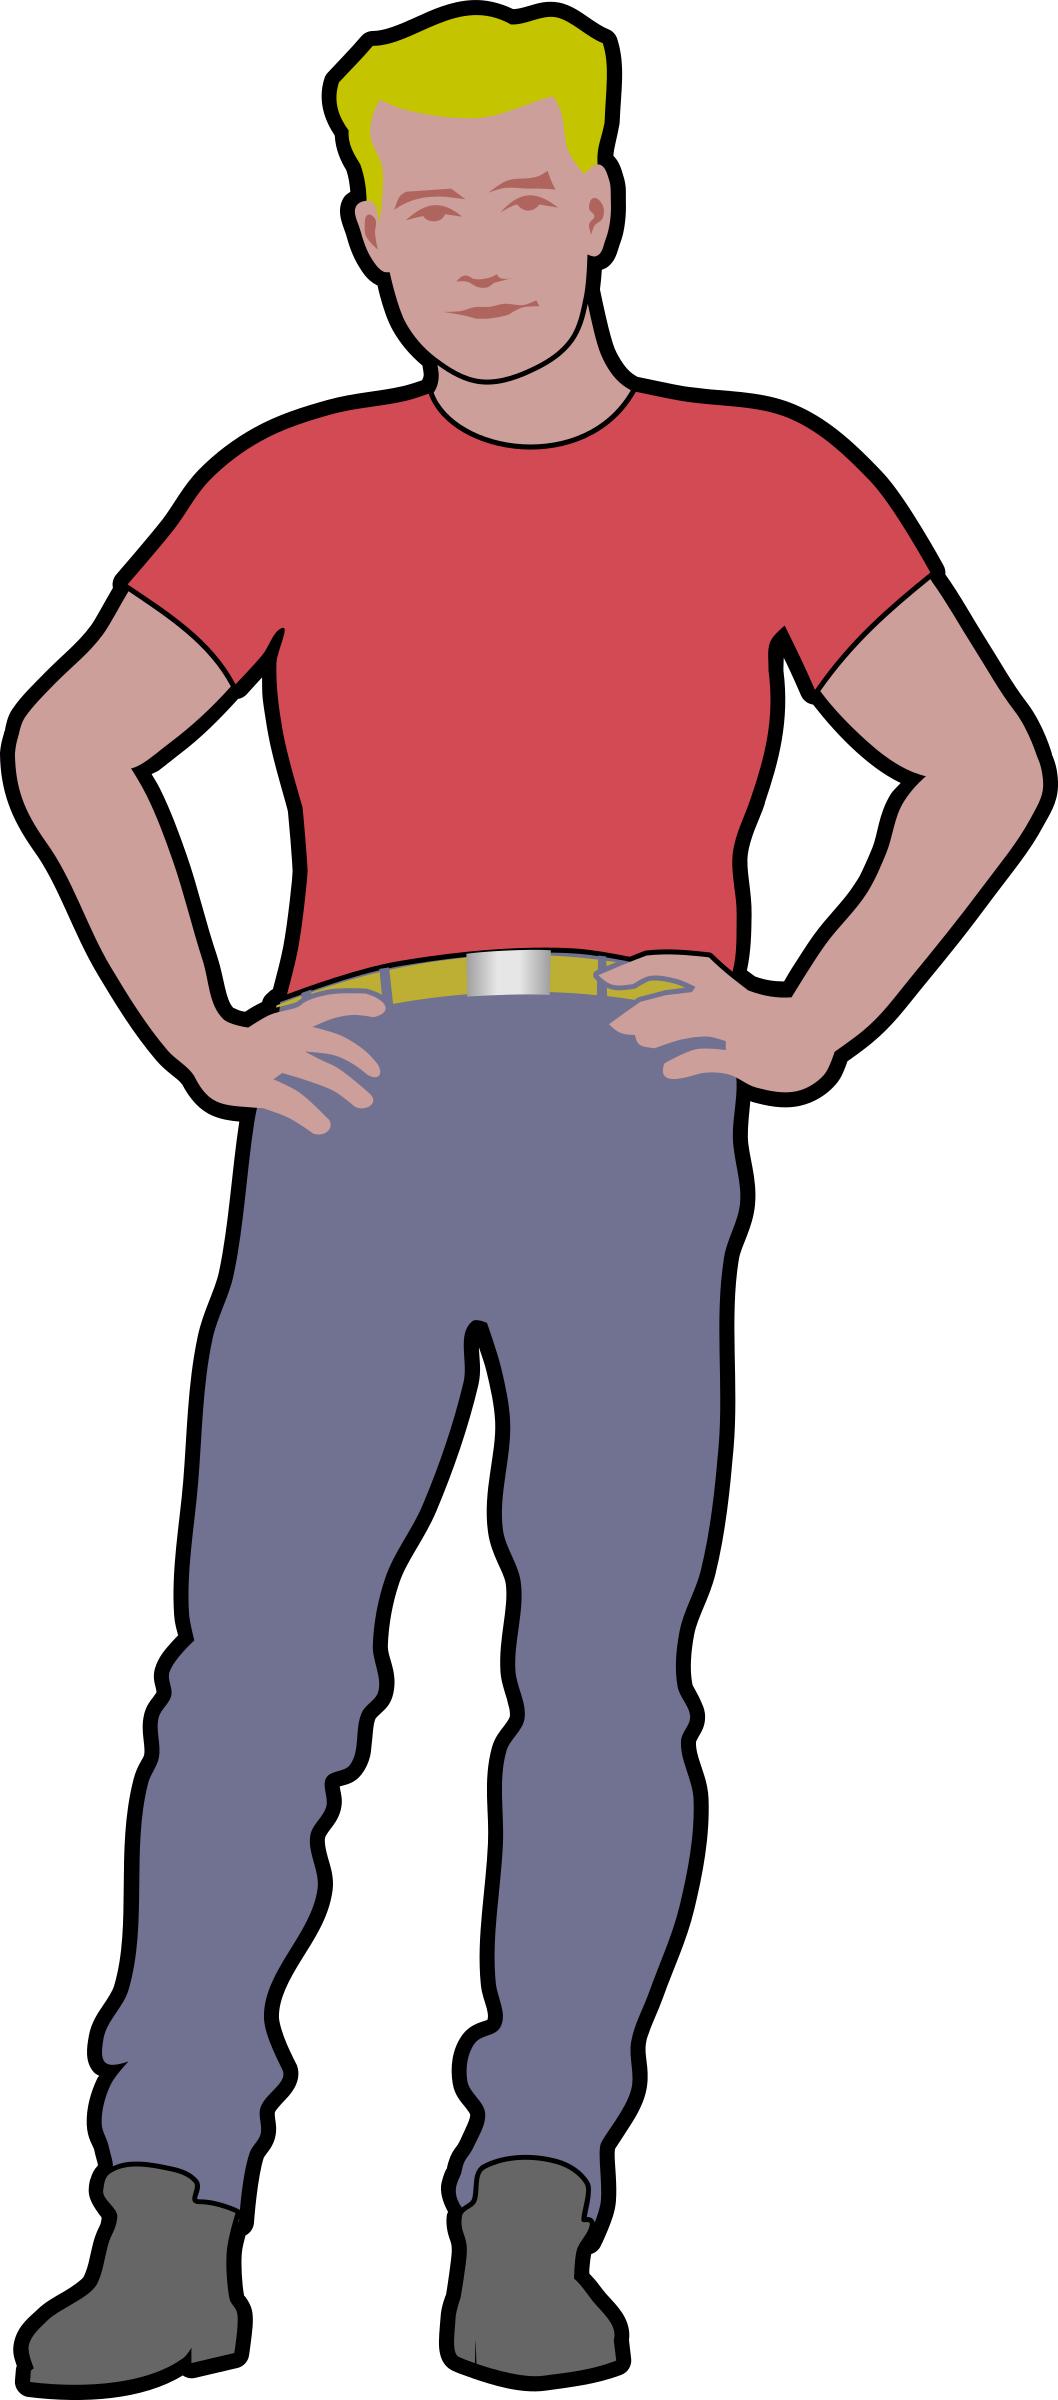 Assertive guy by Rones. Outline png